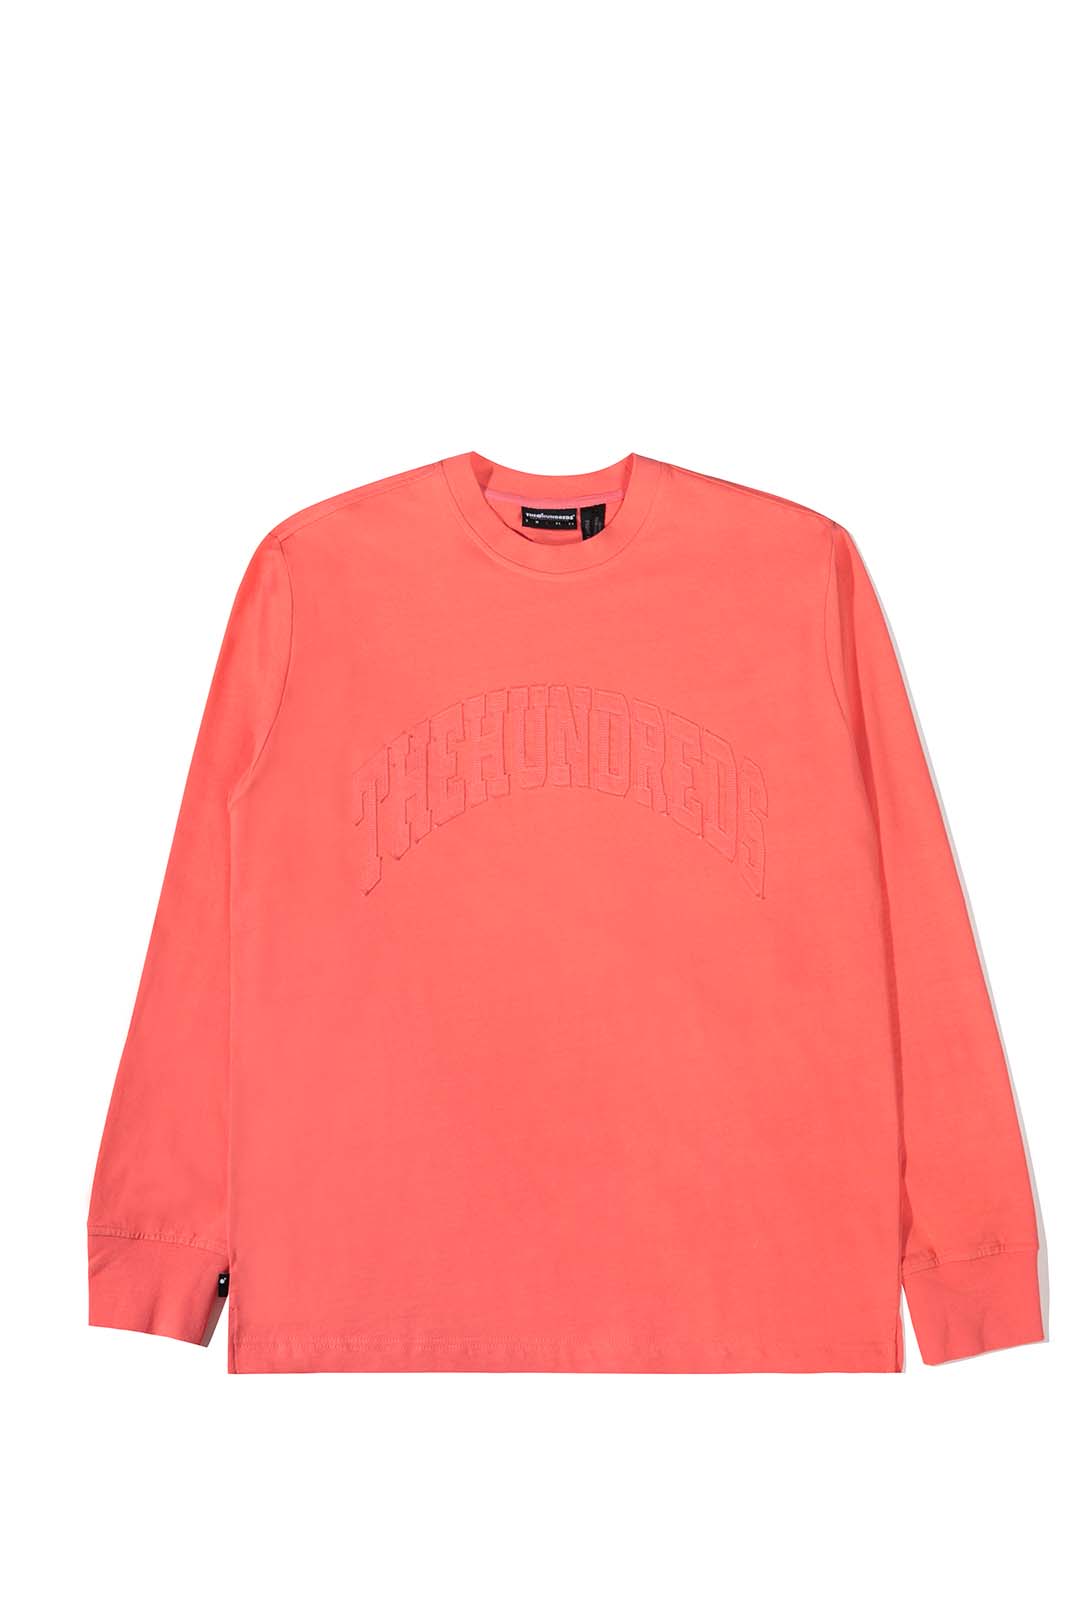 Image of Exposition L/S T-Shirt